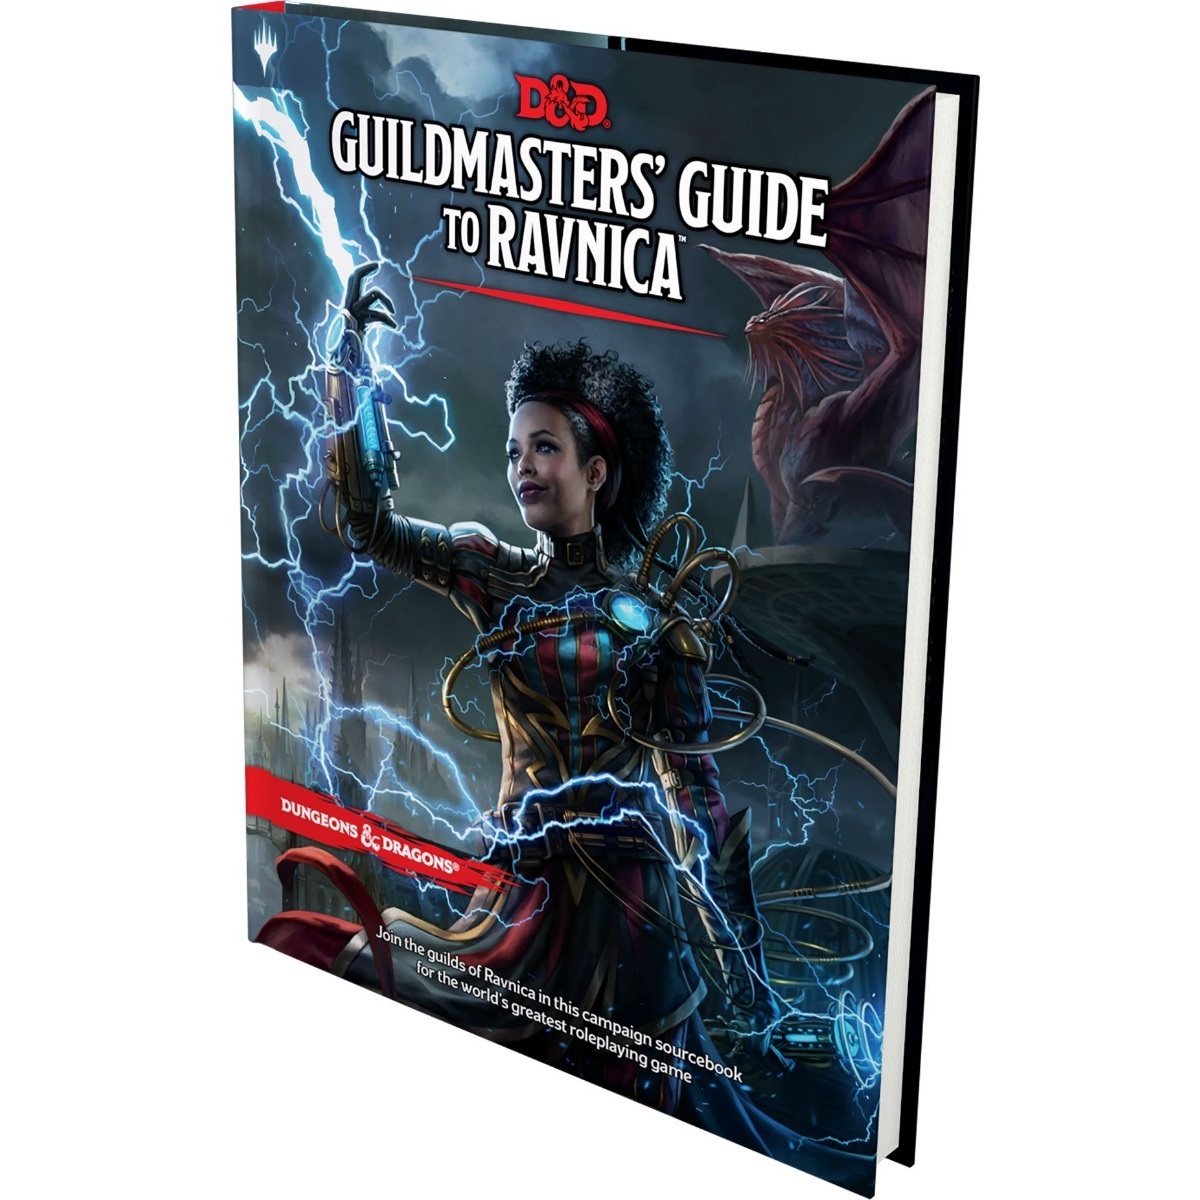 download guild masters guide to ravnica